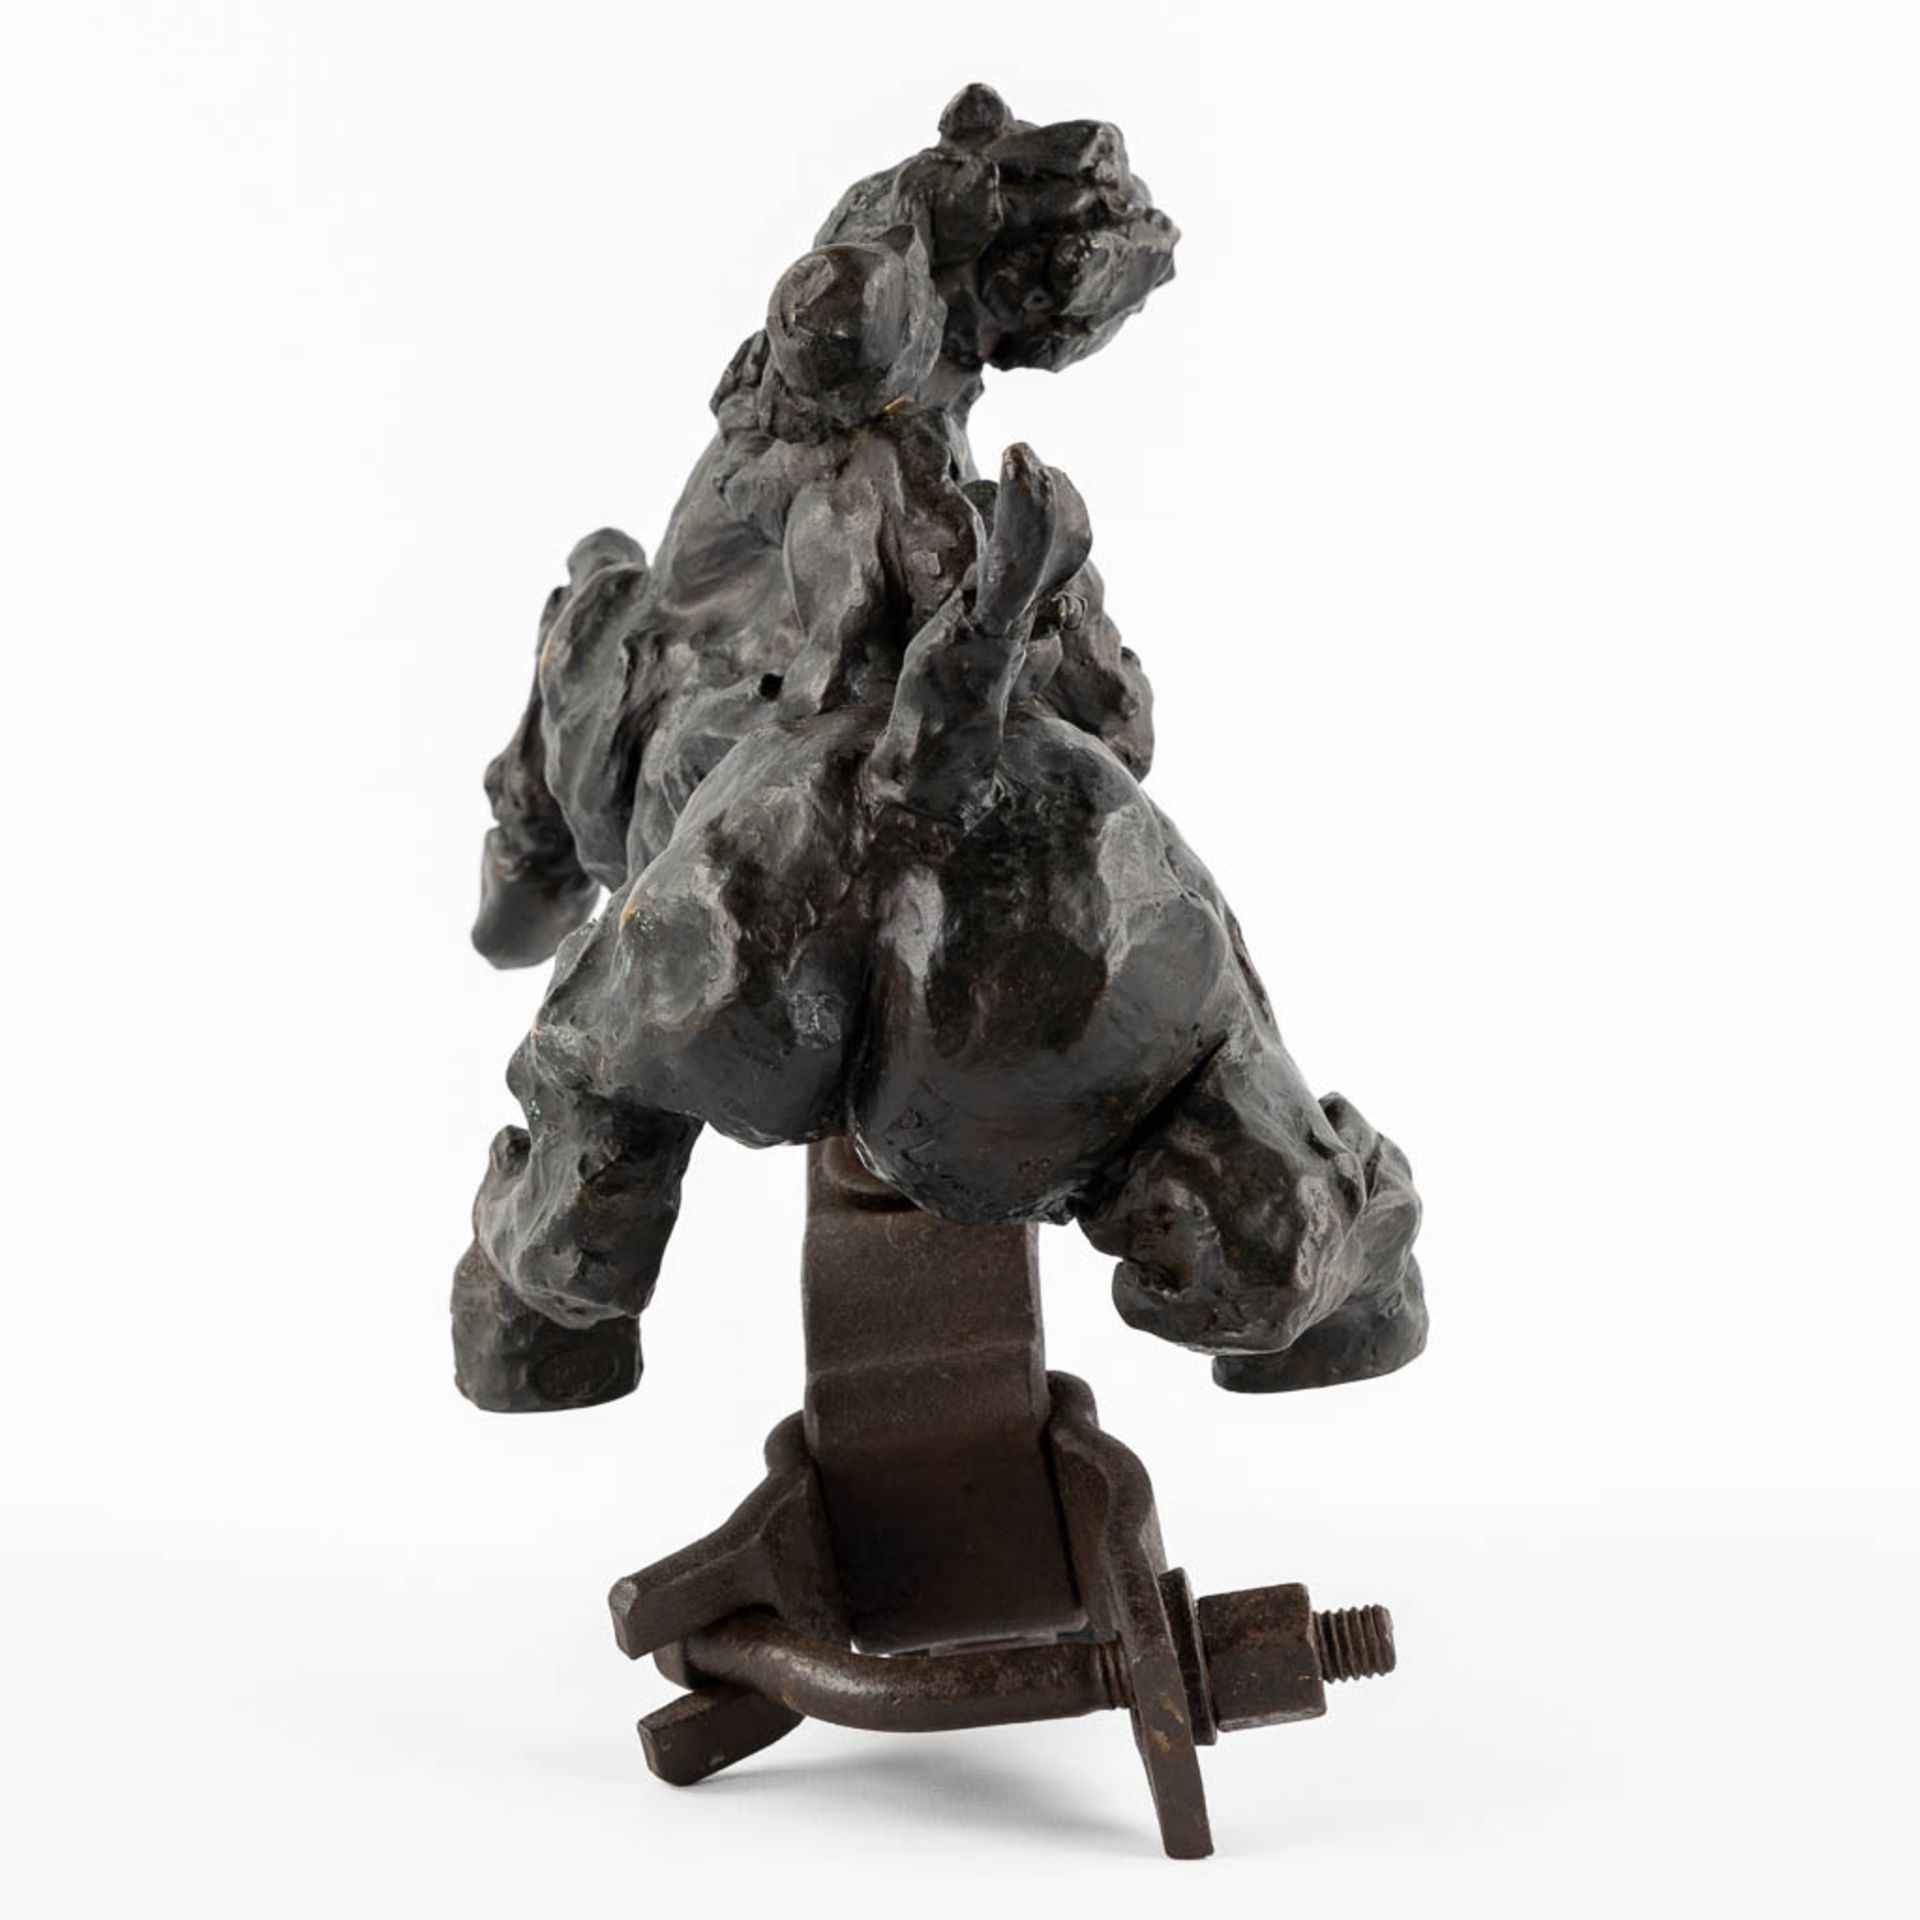 P. LAMBERT (XX) 'Riding a horse' patinated bronze, Ducros Foundry Mark. (L:15 x W:27 x H:28 cm) - Image 4 of 11